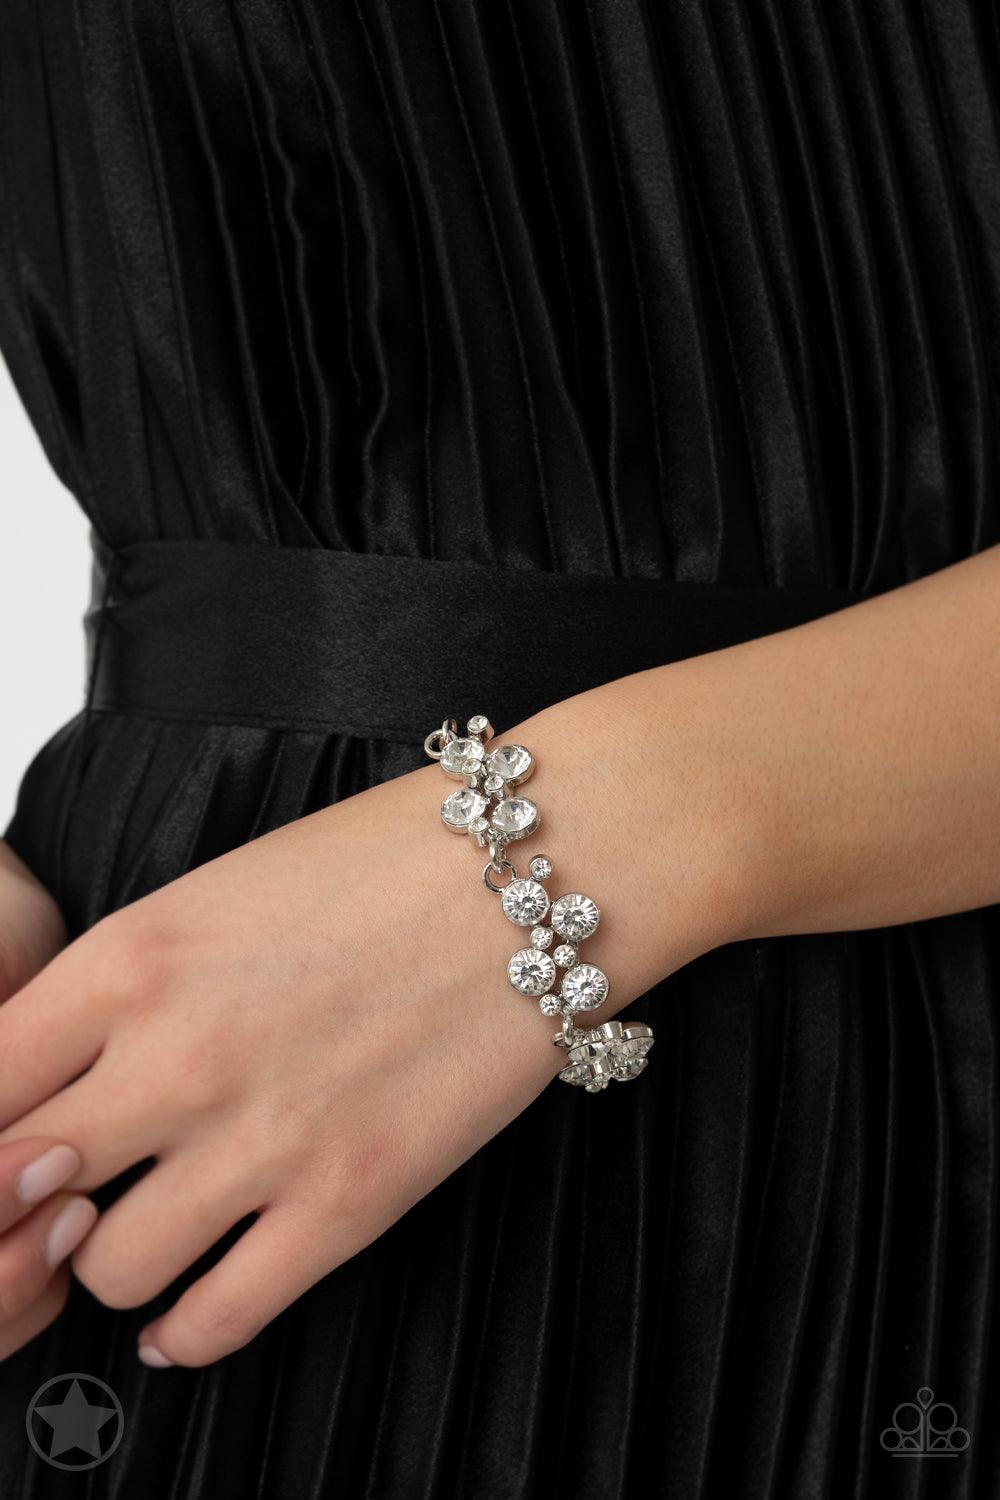 Paparazzi Accessories Old Hollywood Clusters of brilliant white rhinestones drape elegantly along the wrist. The scattered pattern and varying sizes of the rhinestones add breathtaking detail to the piece. Features an adjustable clasp closure. Sold as one